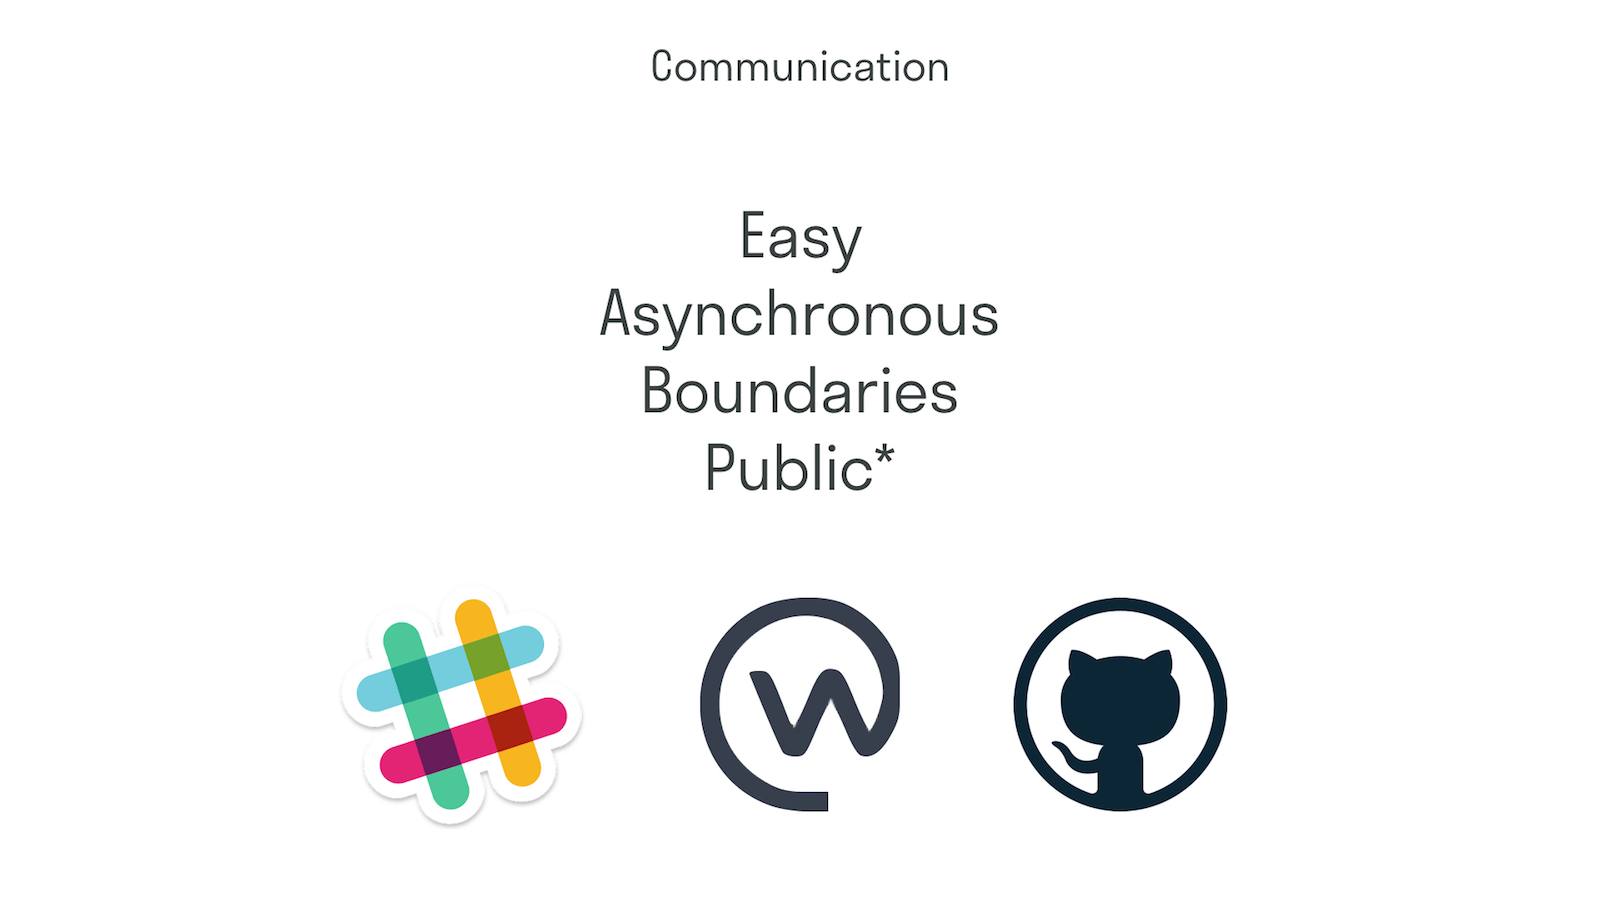 We aim to keep communication easy, asynchronous, non-disruptive and public